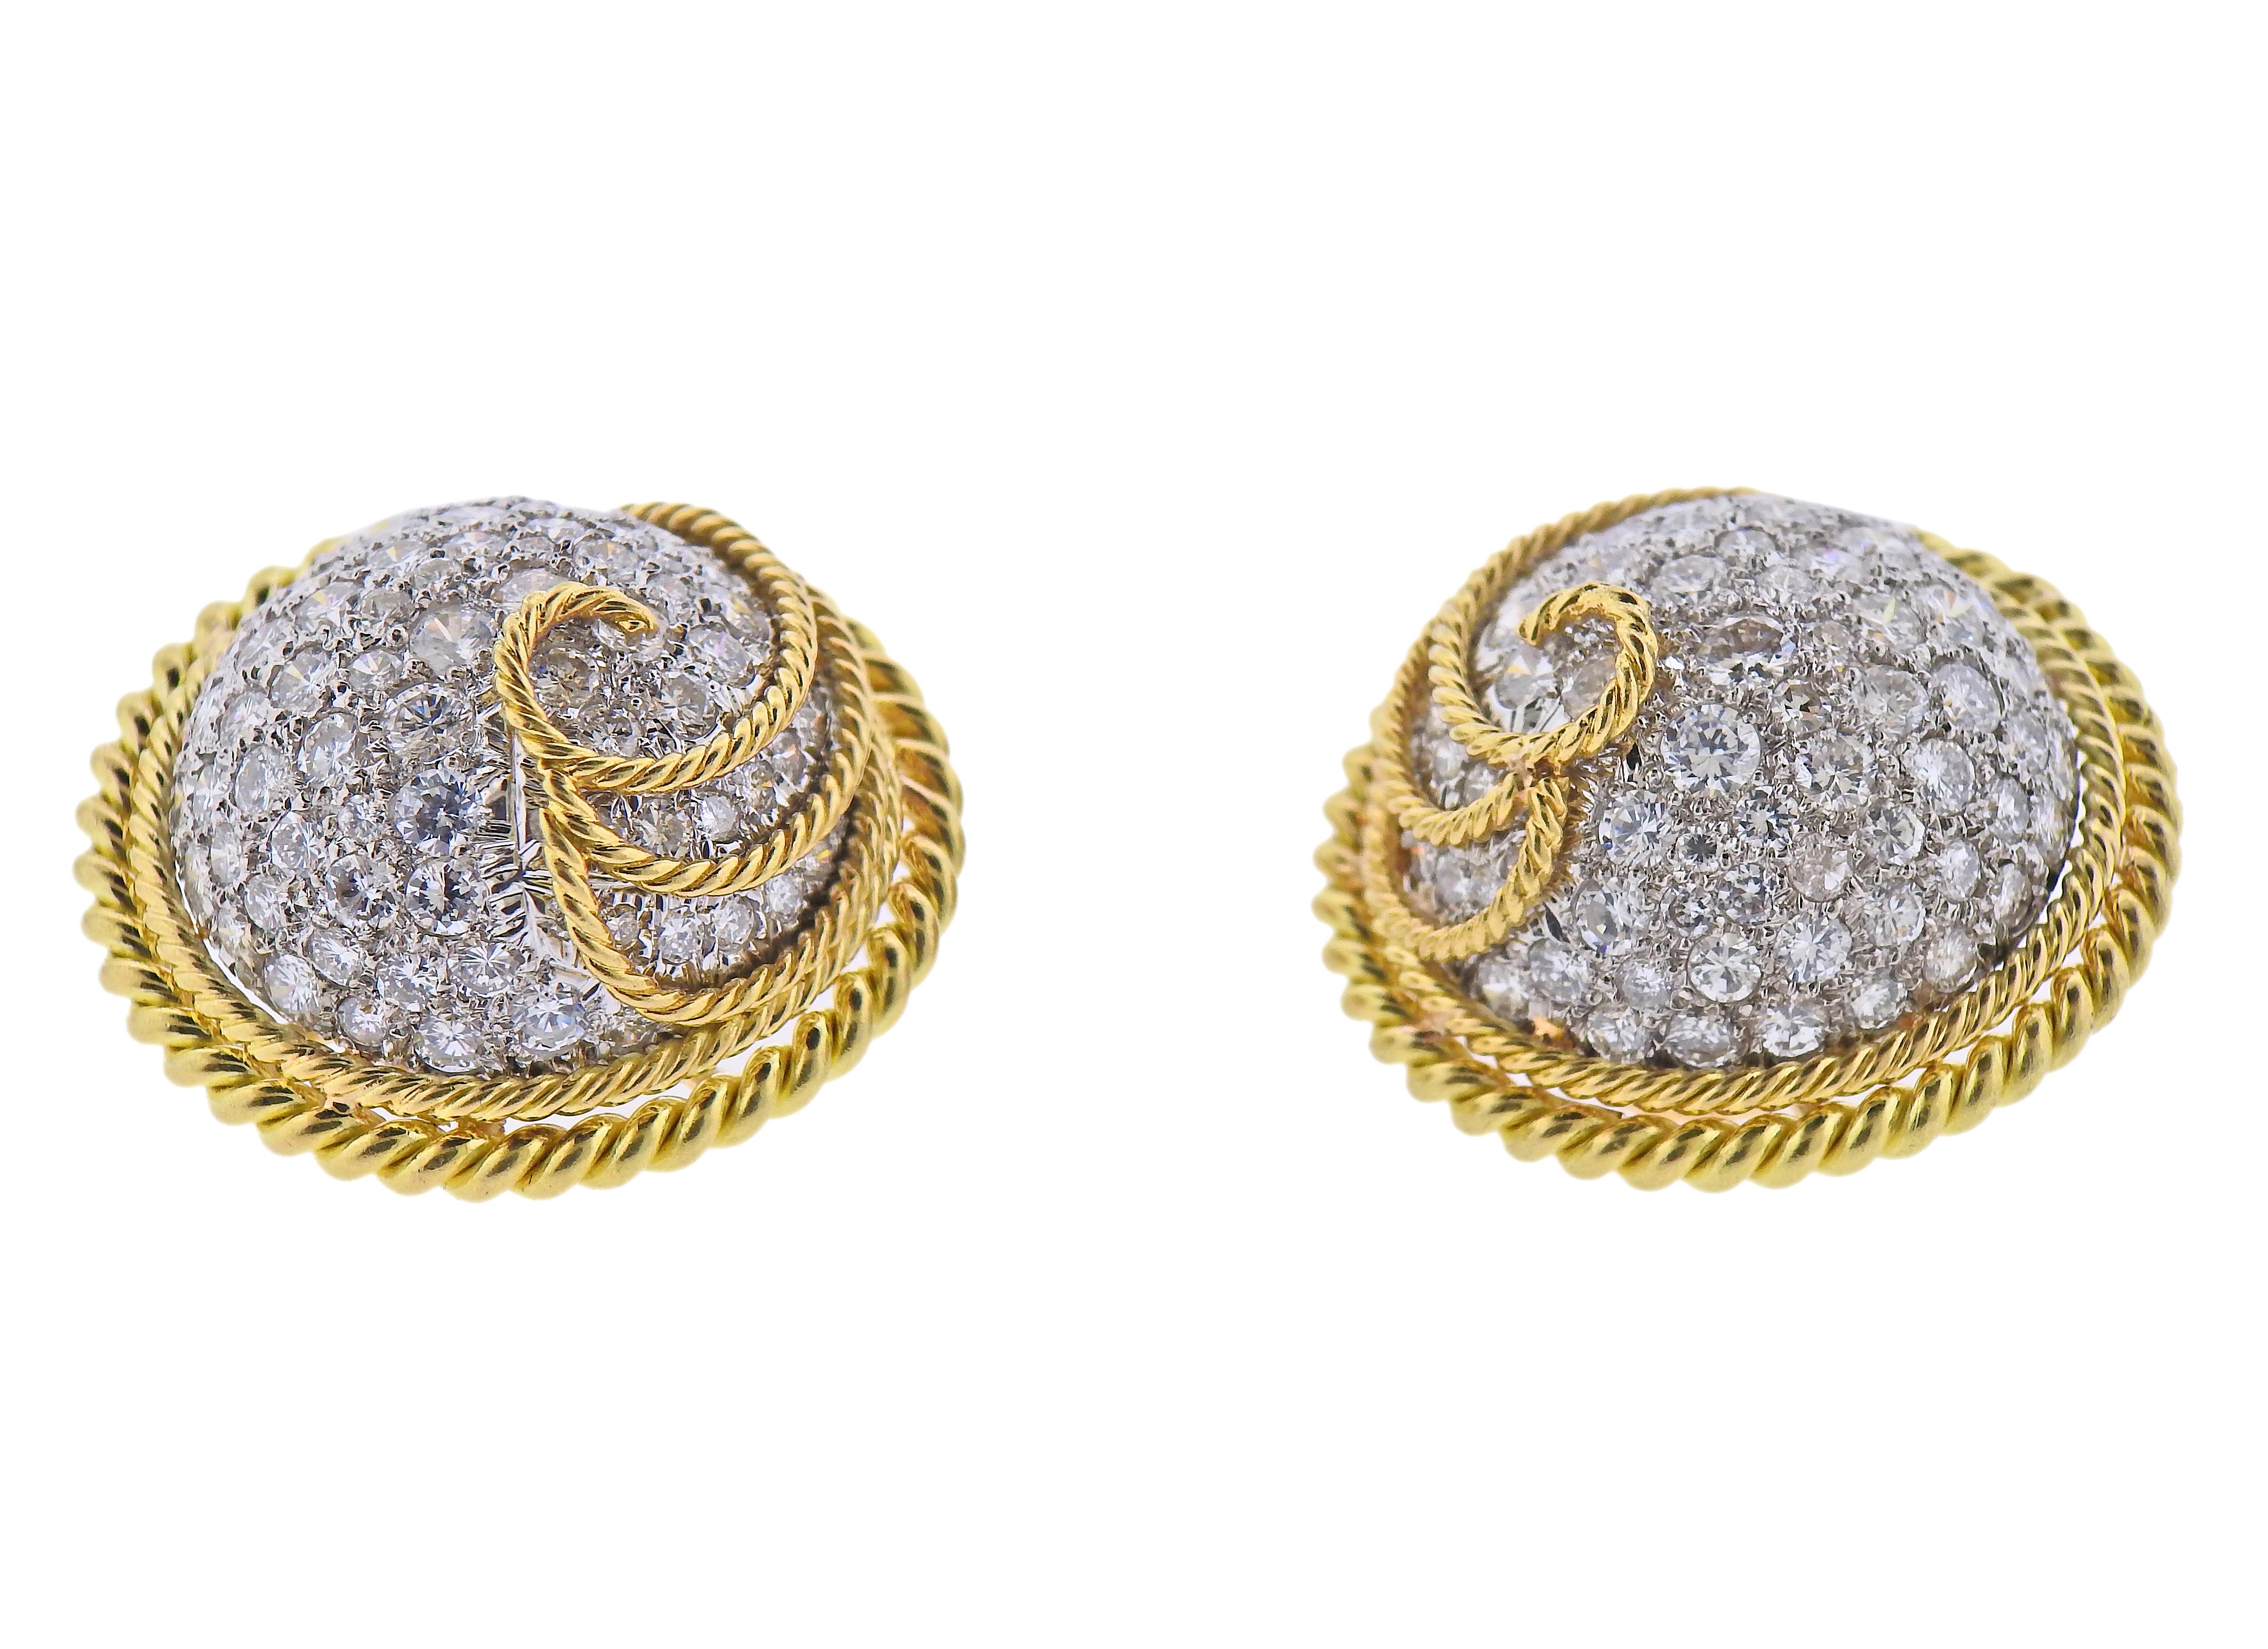 Pair of 18k gold and platinum earrings by Jean Schlumberger for Tiffany & Co, set with approx. 6.00-6.50ctw in diamonds. Earrings are 26mm in diameter. Marked: 750, Tiffany & Co, Schlumbeger. Weight - 36 grams. 